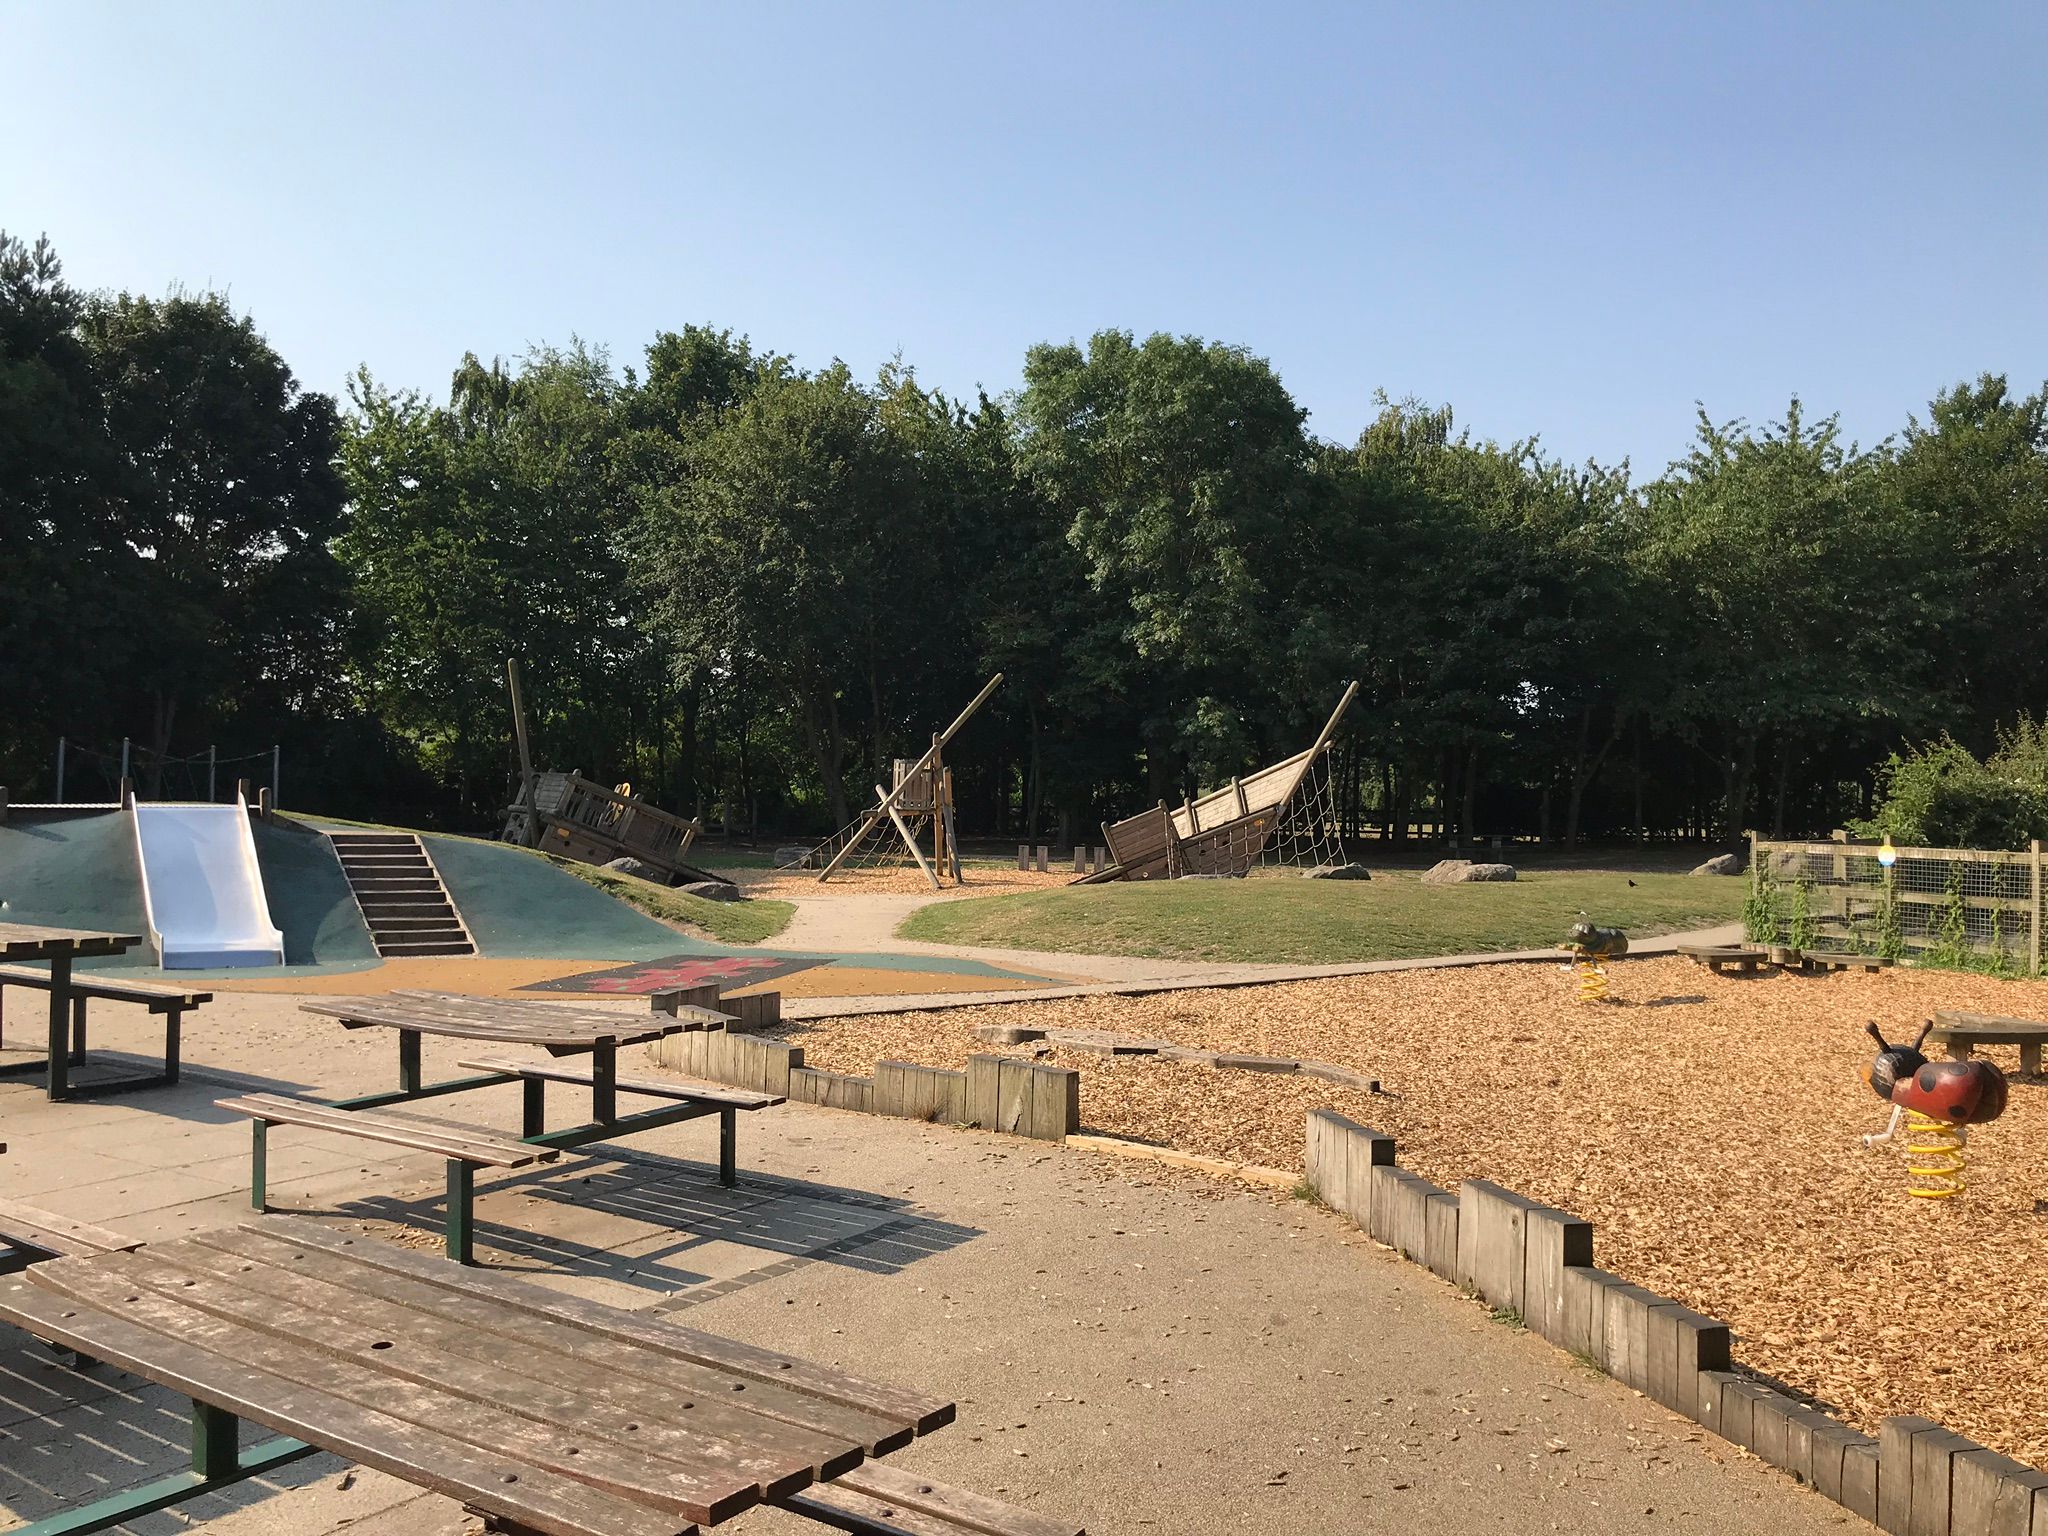 The children's play area at Riverside Country Park, slide and sunken pirate ship play equipment